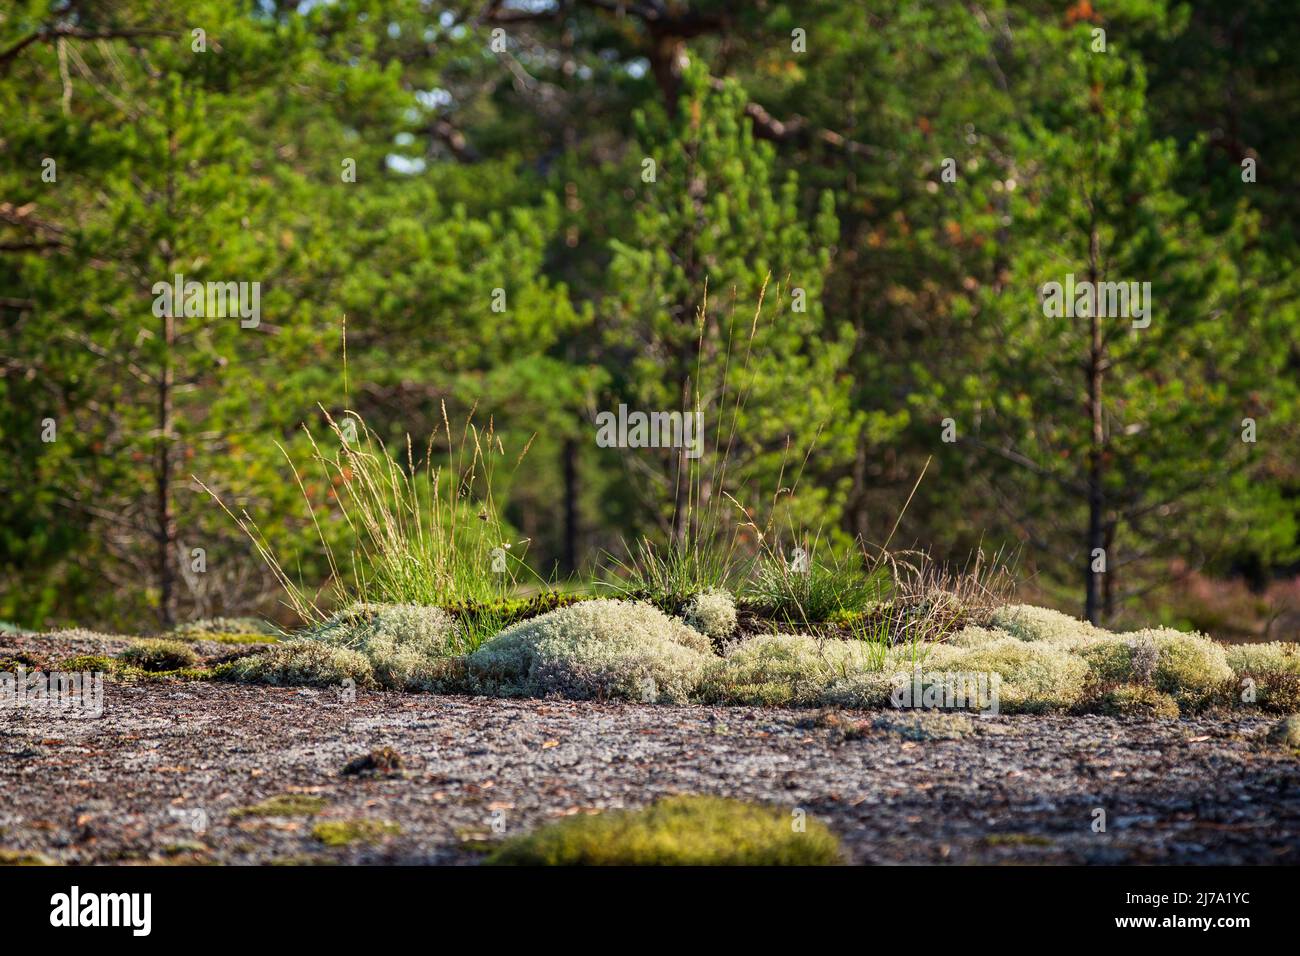 Reindeer lichen and hay plants on rocky ground in a lush pine tree forest in Åland Islands, Finland, on a sunny day in the summer or early autumn. Stock Photo